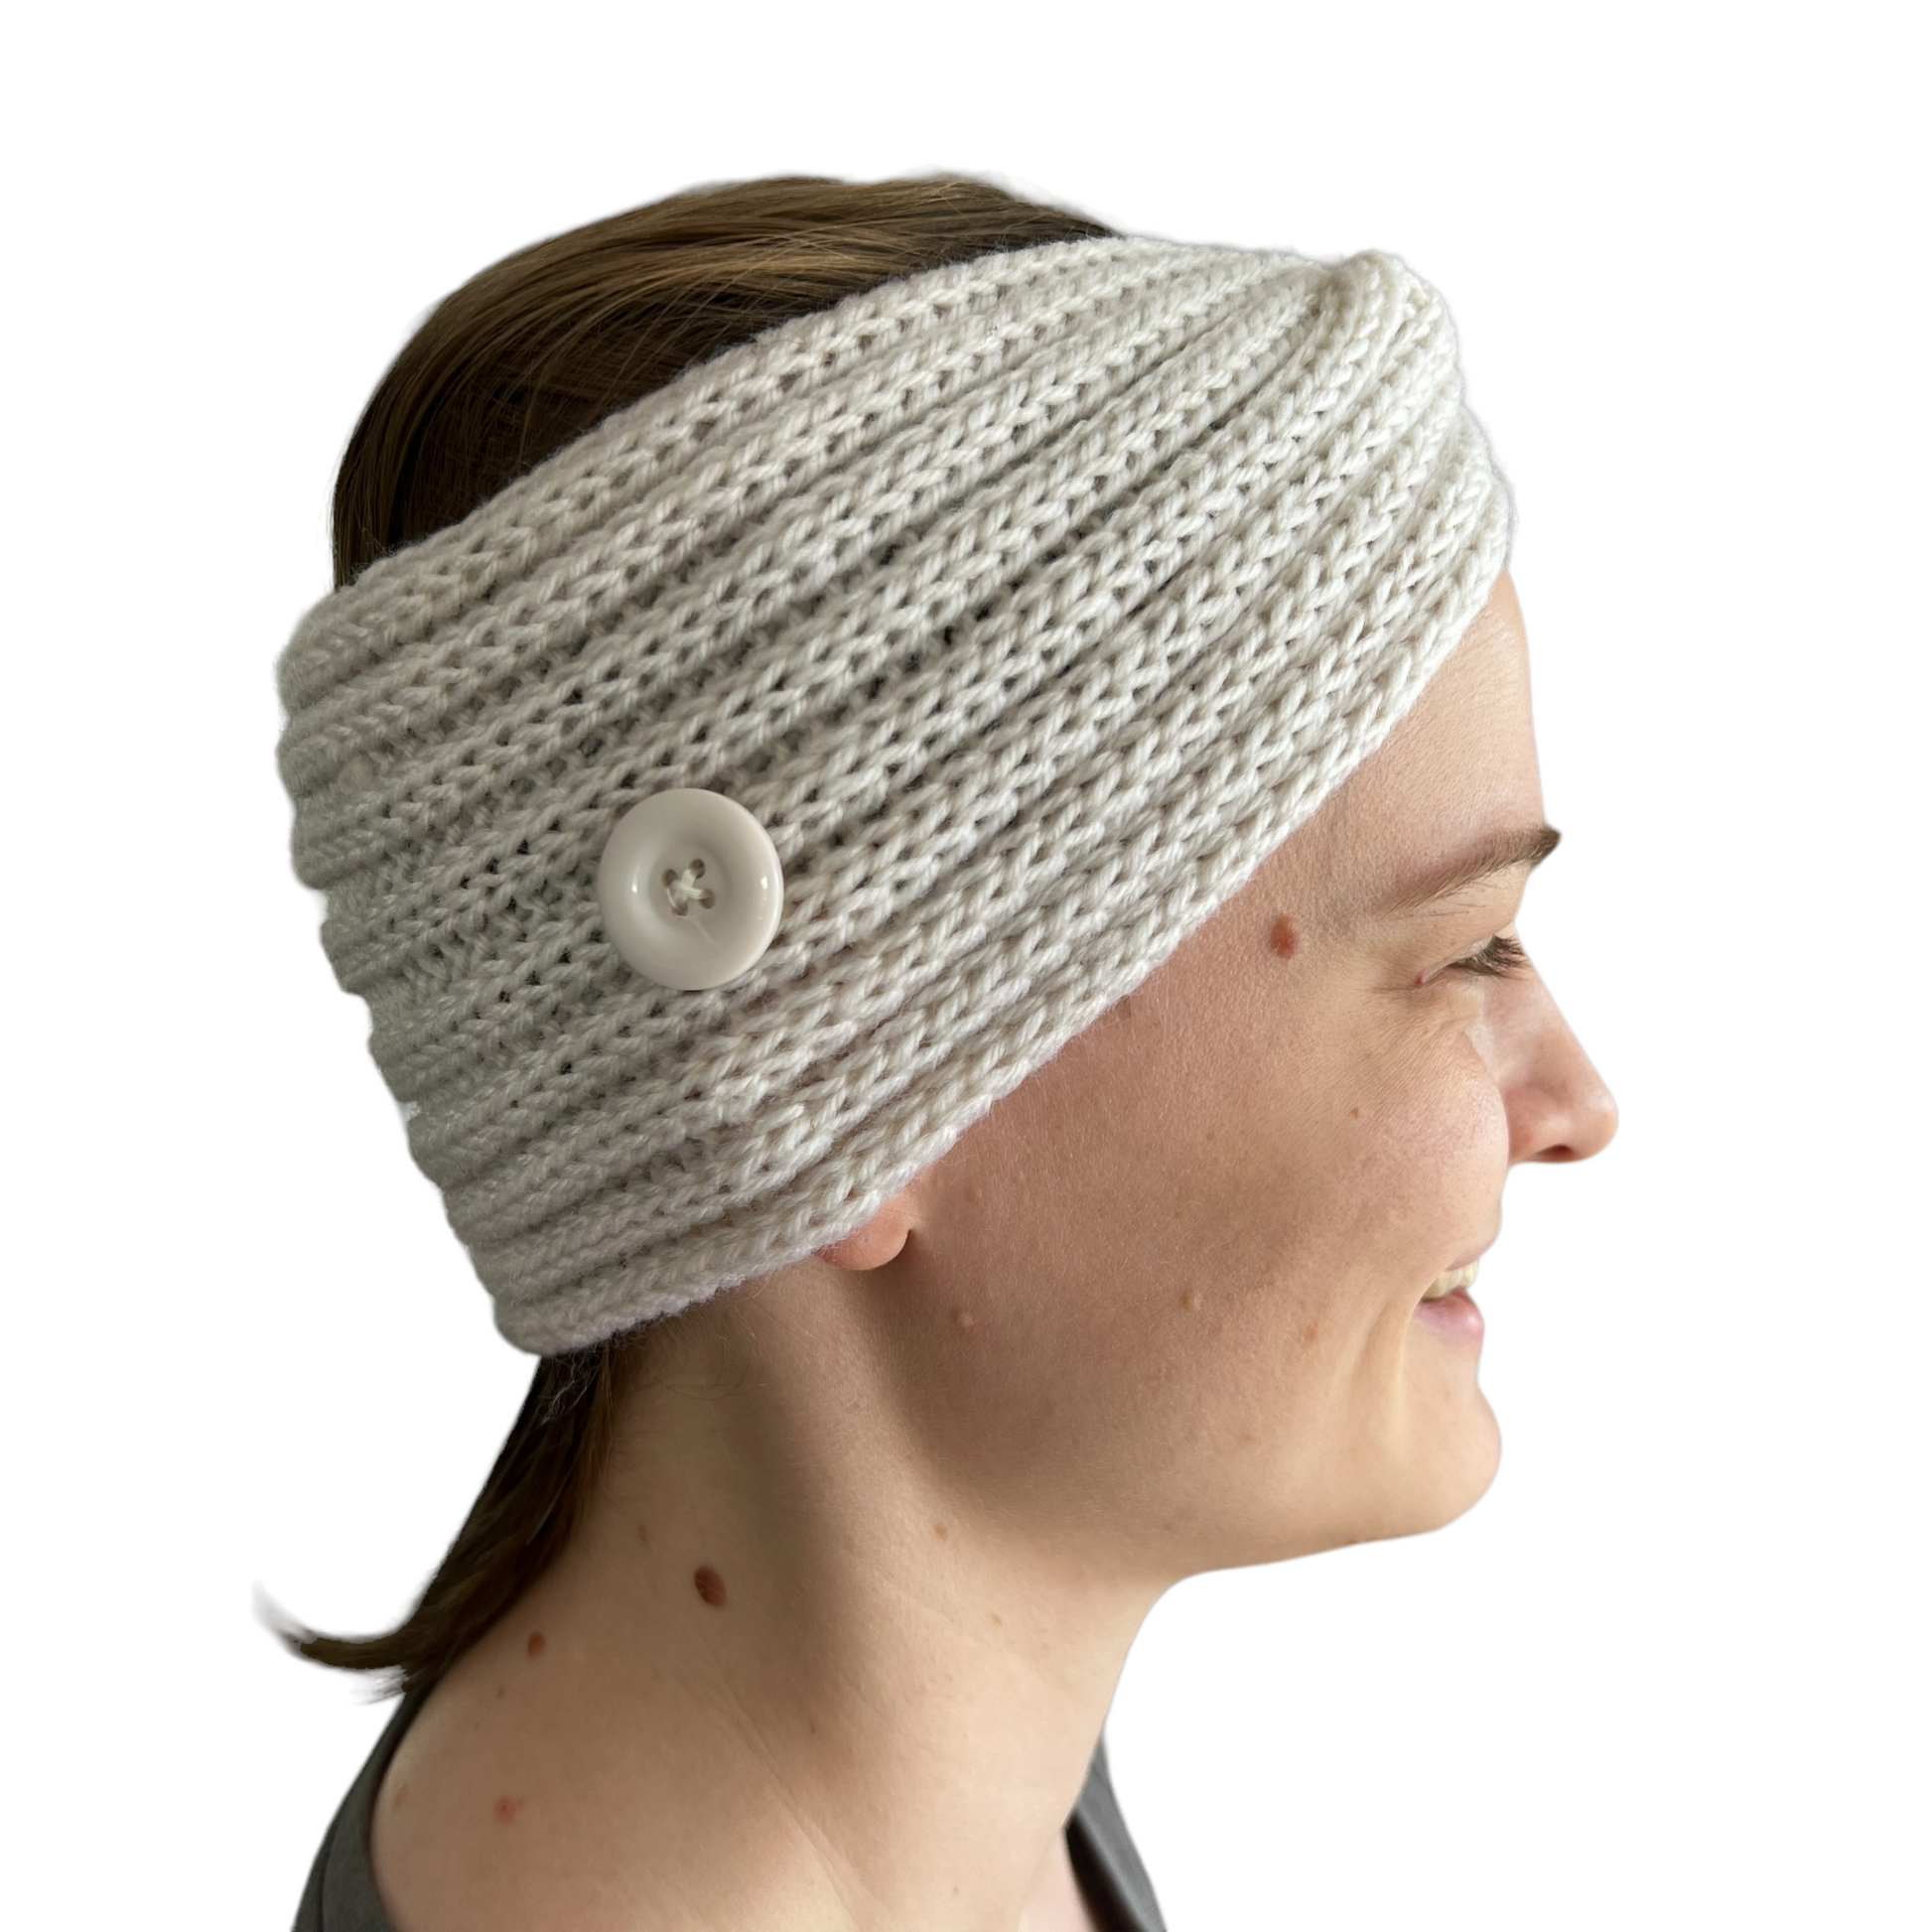 Knitted Headband with Buttons Mask SPIRIT SPARKPLUGS   